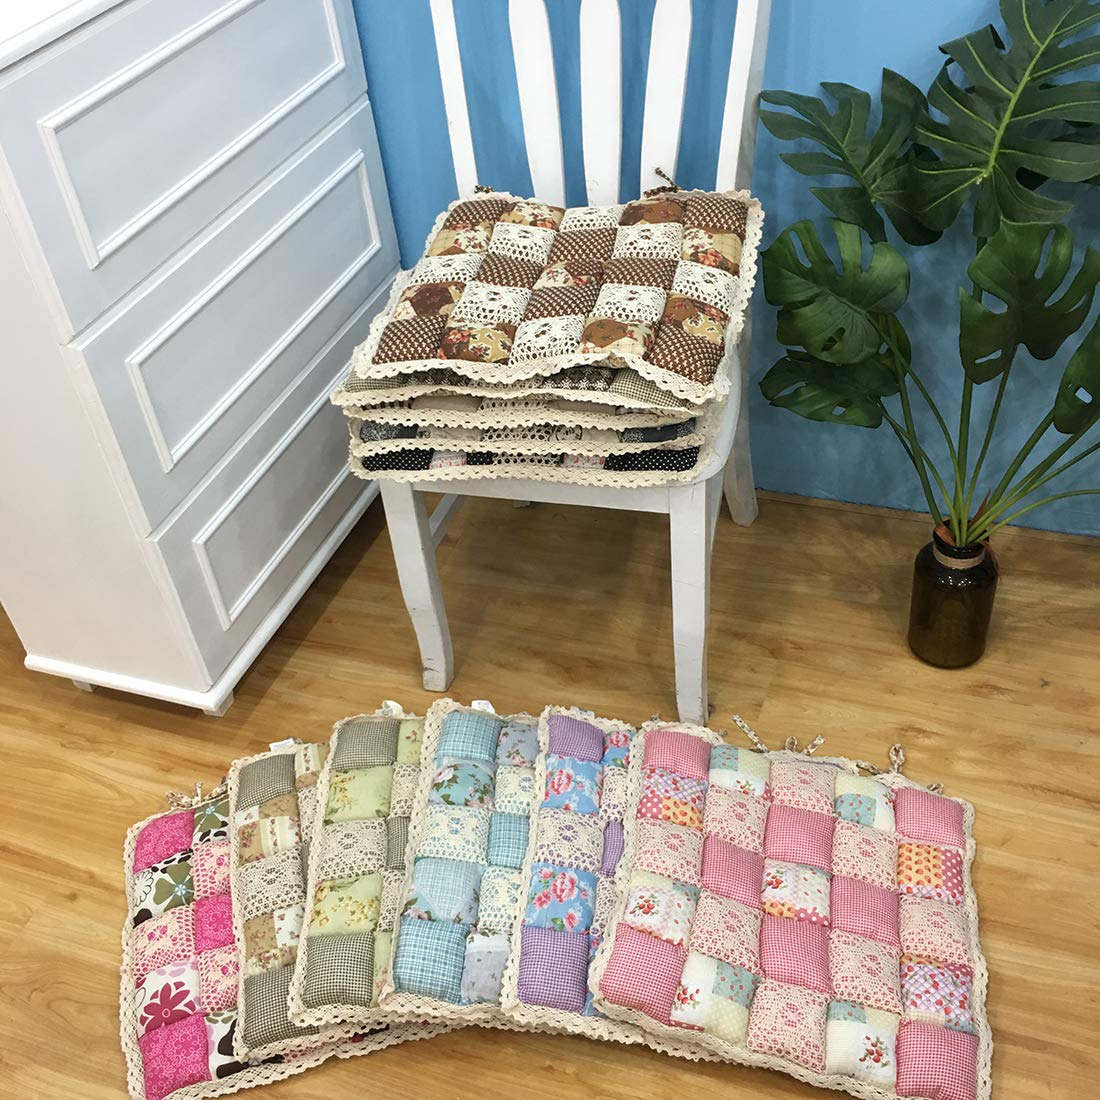 vctops Patchwork Chair Pad with Ties No Slip Lace Trim Chair Cushion Farmhouse Floral Print Kitchen Dining Seat Cushion (098, 16"x16")